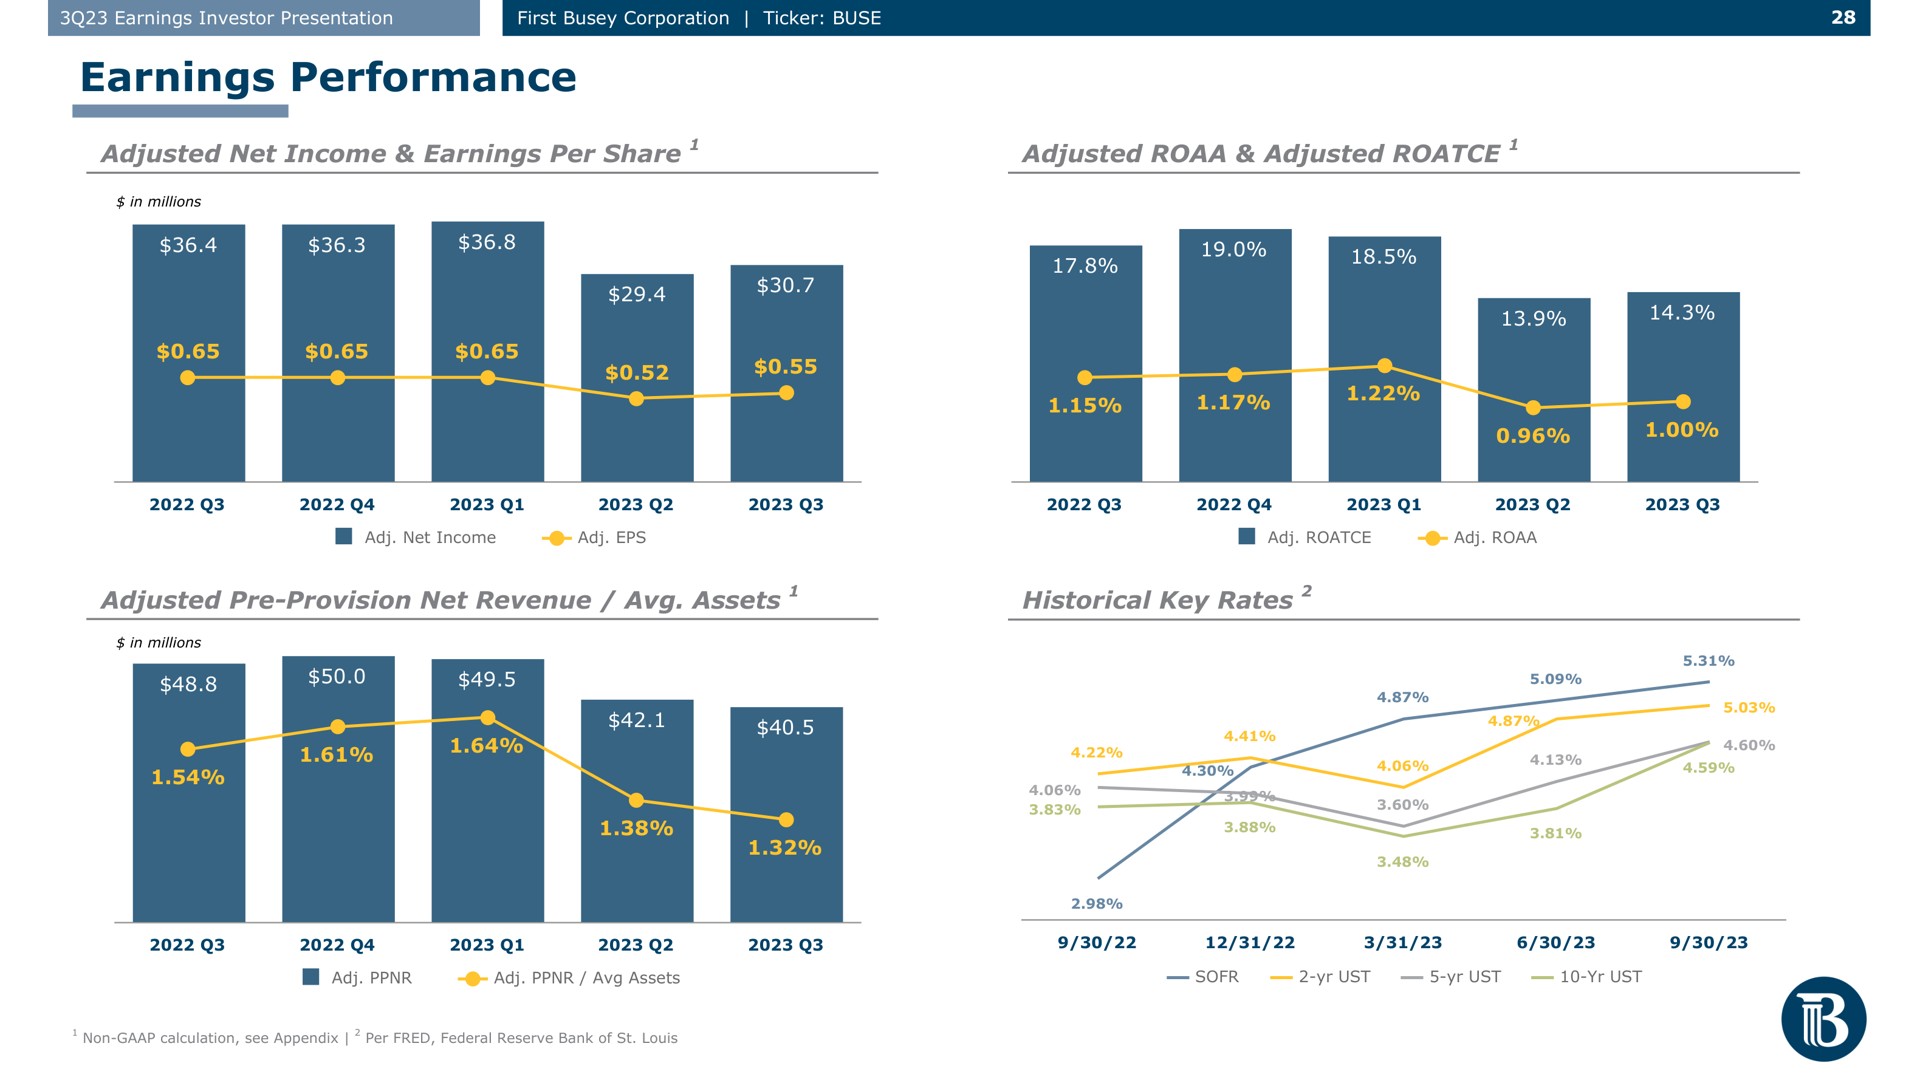 earnings performance adjusted net income earnings per share adjusted adjusted adjusted provision net revenue assets historical key rates | First Busey